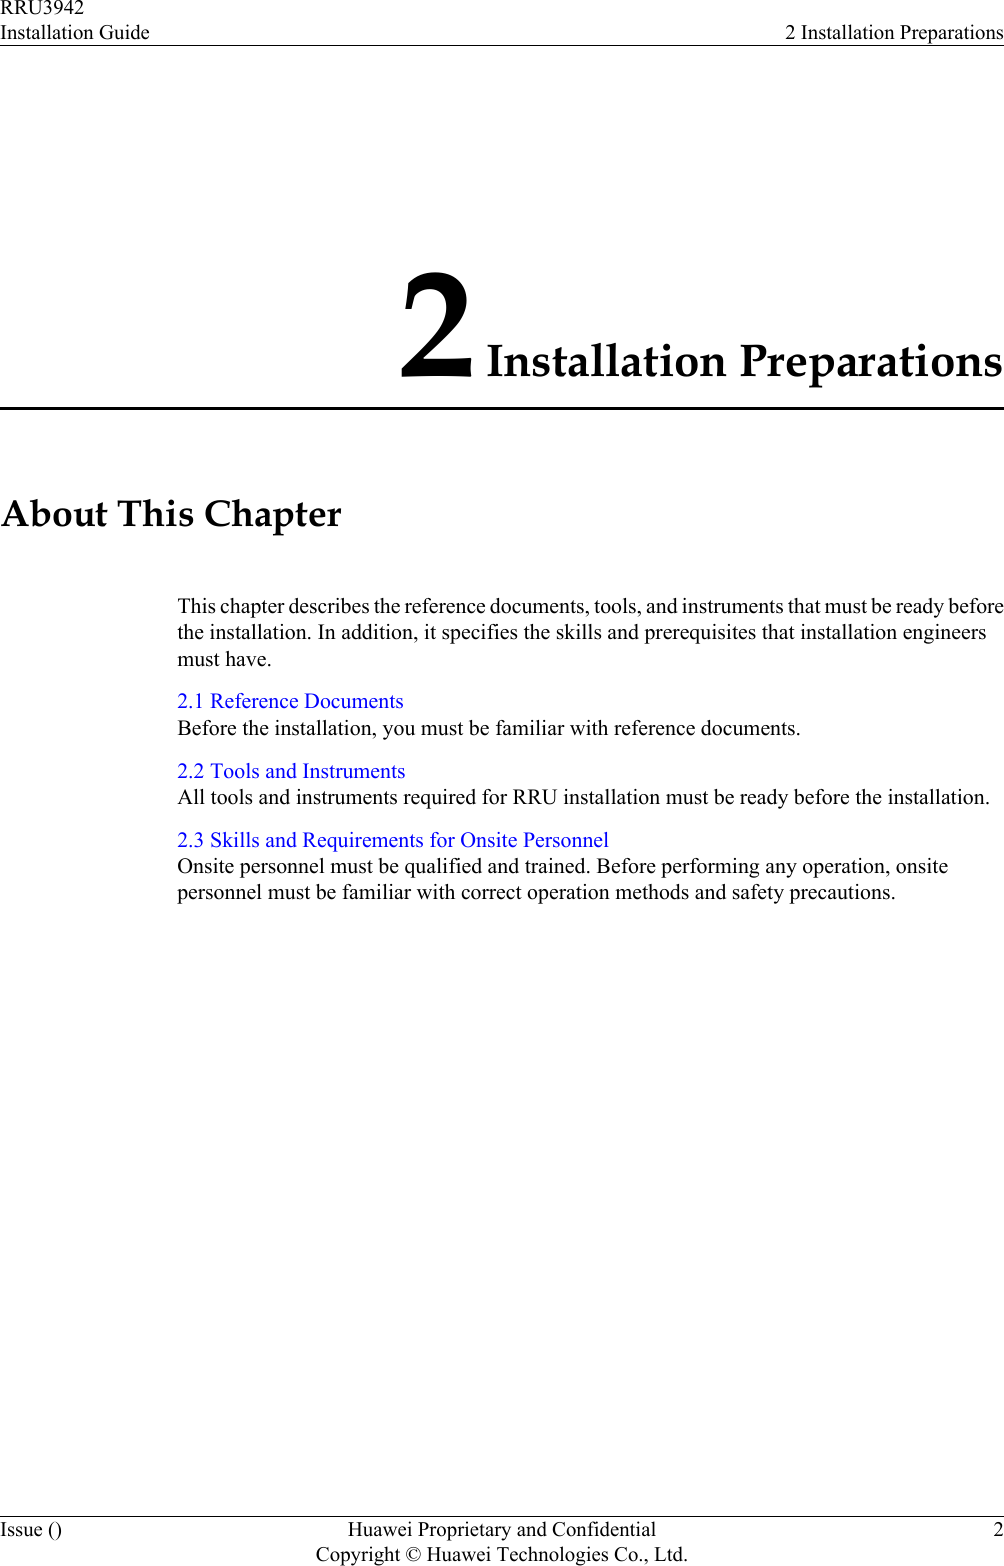 2 Installation PreparationsAbout This ChapterThis chapter describes the reference documents, tools, and instruments that must be ready beforethe installation. In addition, it specifies the skills and prerequisites that installation engineersmust have.2.1 Reference DocumentsBefore the installation, you must be familiar with reference documents.2.2 Tools and InstrumentsAll tools and instruments required for RRU installation must be ready before the installation.2.3 Skills and Requirements for Onsite PersonnelOnsite personnel must be qualified and trained. Before performing any operation, onsitepersonnel must be familiar with correct operation methods and safety precautions.RRU3942Installation Guide 2 Installation PreparationsIssue () Huawei Proprietary and ConfidentialCopyright © Huawei Technologies Co., Ltd.2